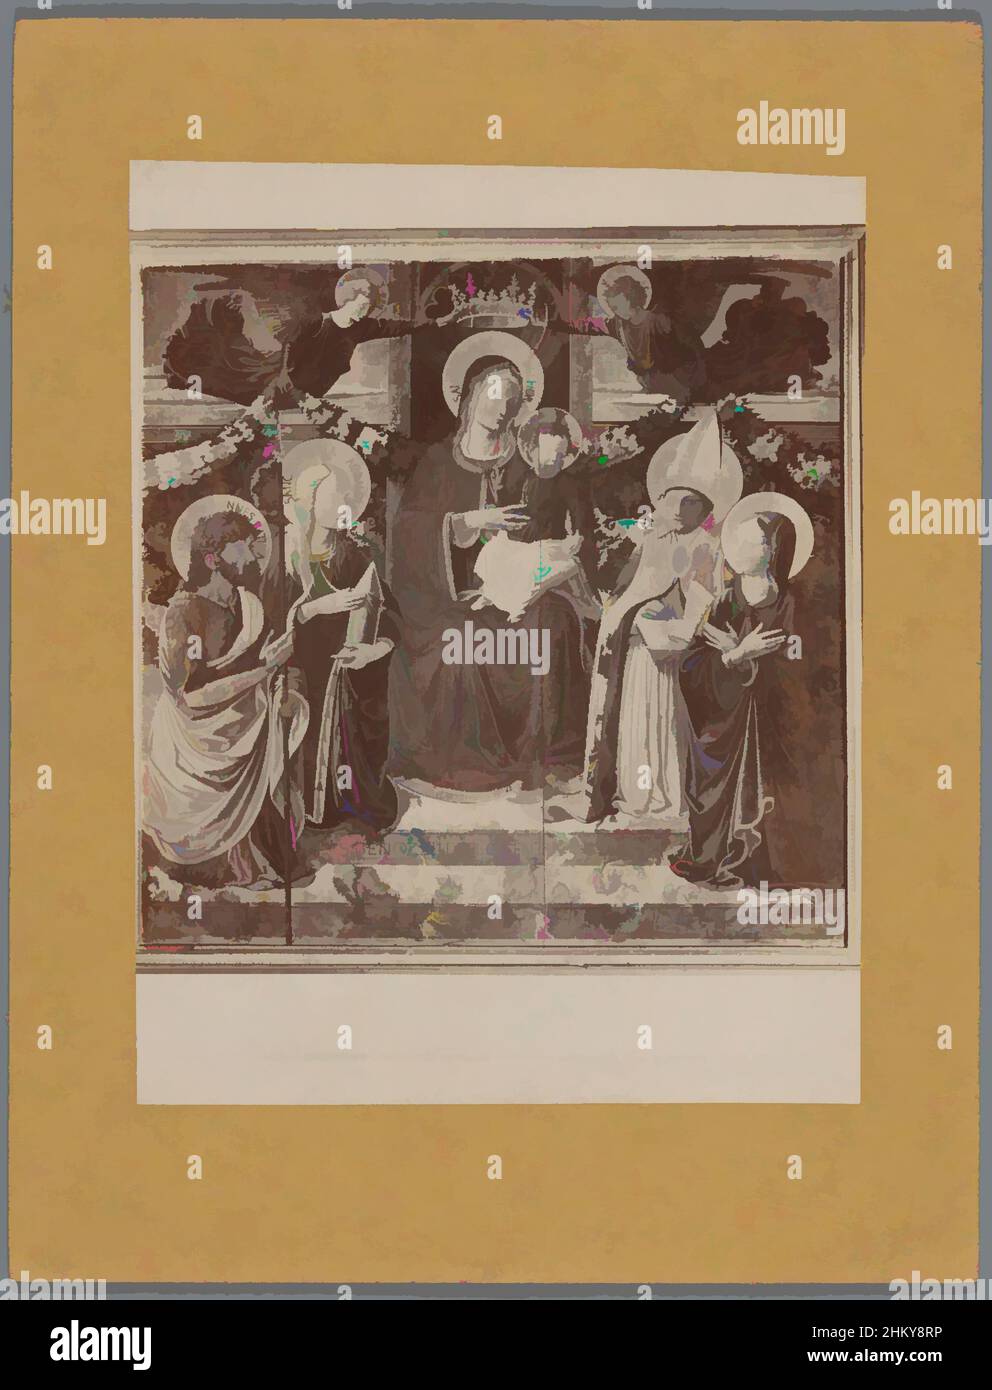 Art inspired by Photoreproduction of a painting by B. Gozzoli, depicting Mary with Child between Saints and Angels, S. GIMIGNANO Chiesa della Collegiata. La Madonna col Bambino Gesù, ai lati Santi e Sante., Alinari, after: Benozzo Gozzoli, Collegiata Santa Maria Assuntaafter: Italy, c, Classic works modernized by Artotop with a splash of modernity. Shapes, color and value, eye-catching visual impact on art. Emotions through freedom of artworks in a contemporary way. A timeless message pursuing a wildly creative new direction. Artists turning to the digital medium and creating the Artotop NFT Stock Photo